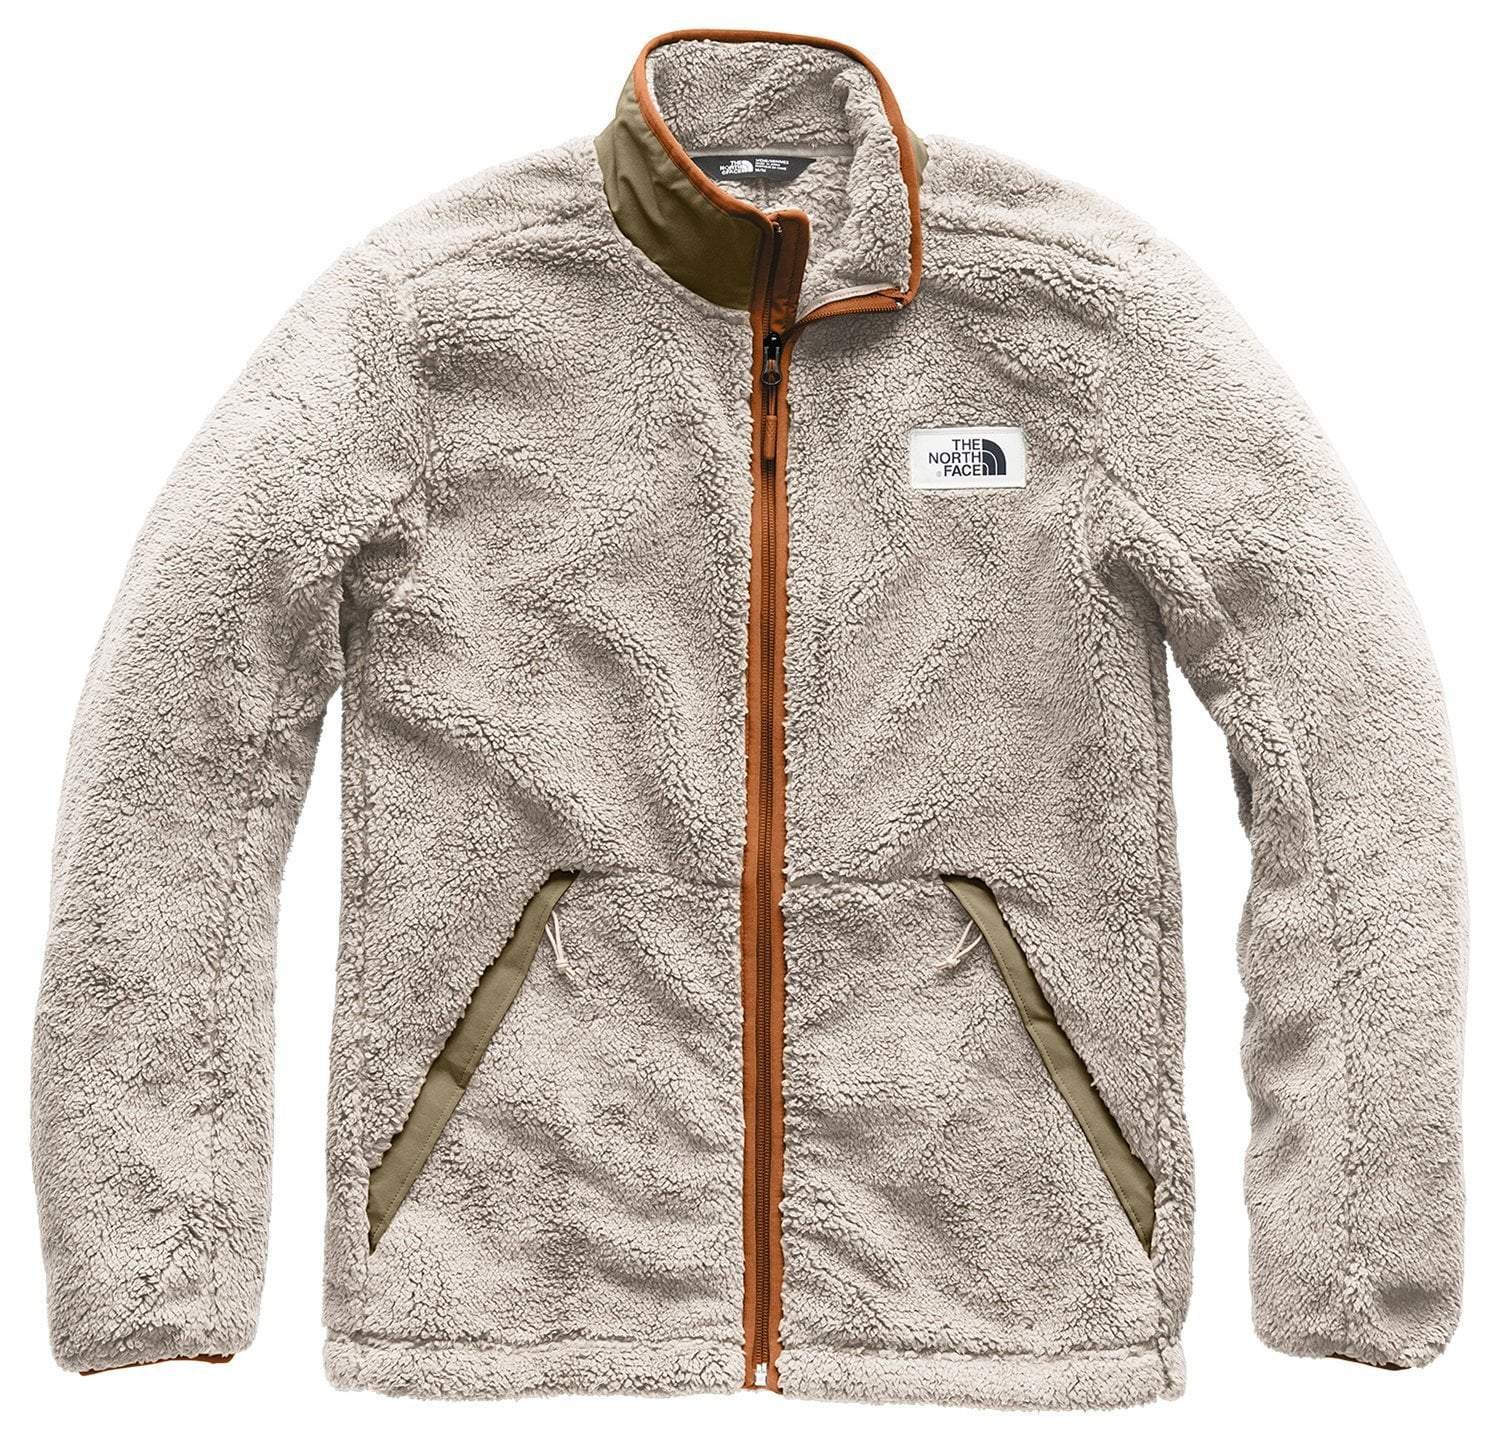 Gear Coop: The North Face Season Favorites - Reach For Adventure! | Milled